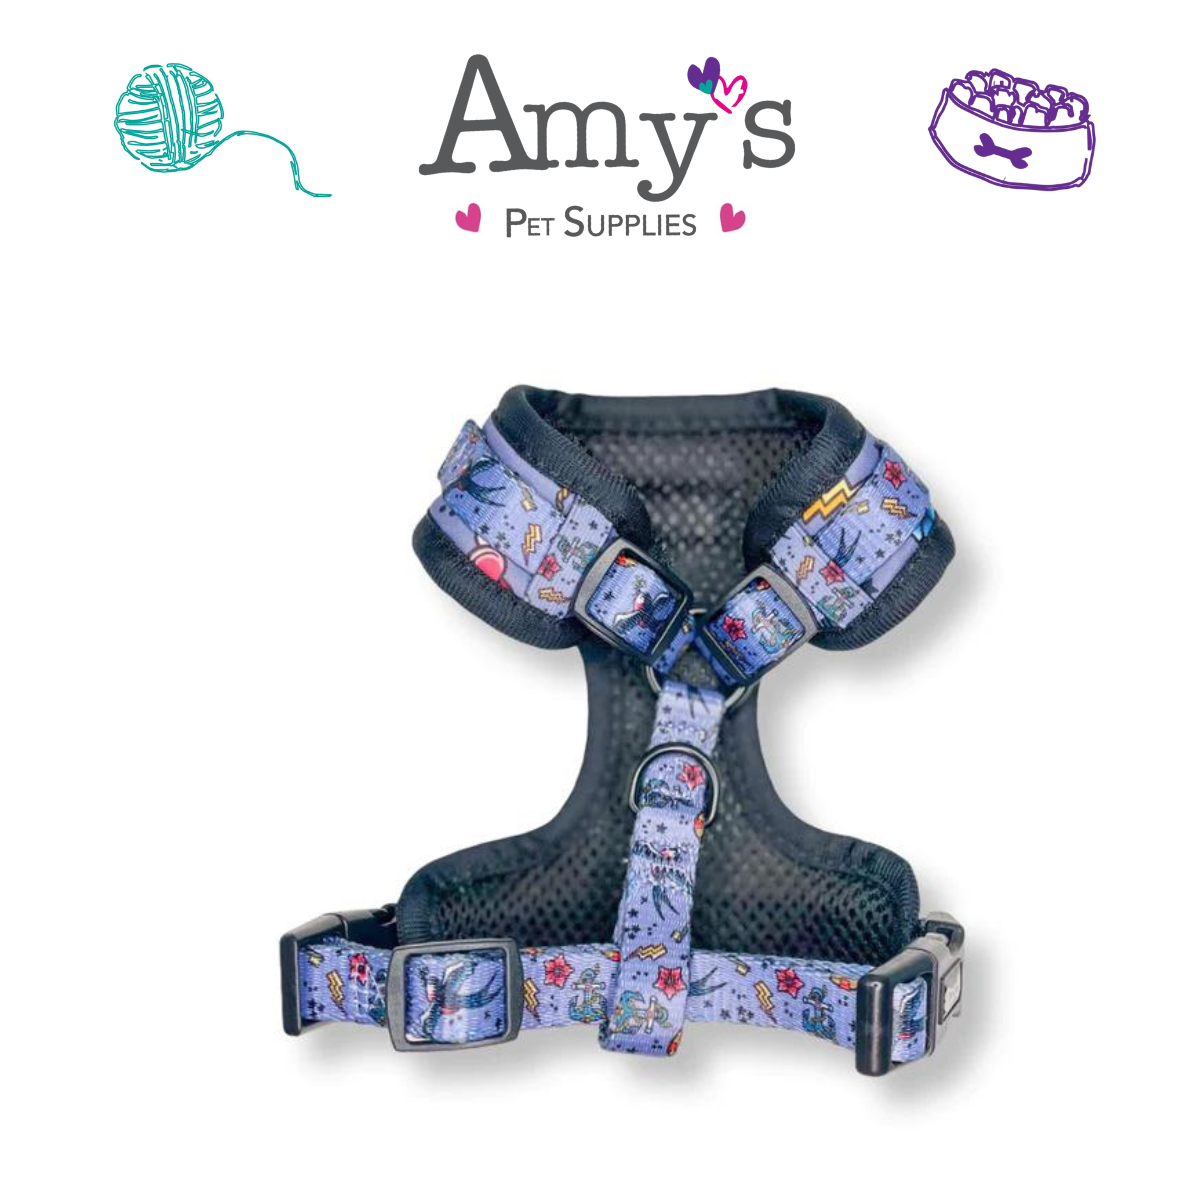 Pup Chic - Artful Dogster Range - Harnesses, Leads, Collars Etc